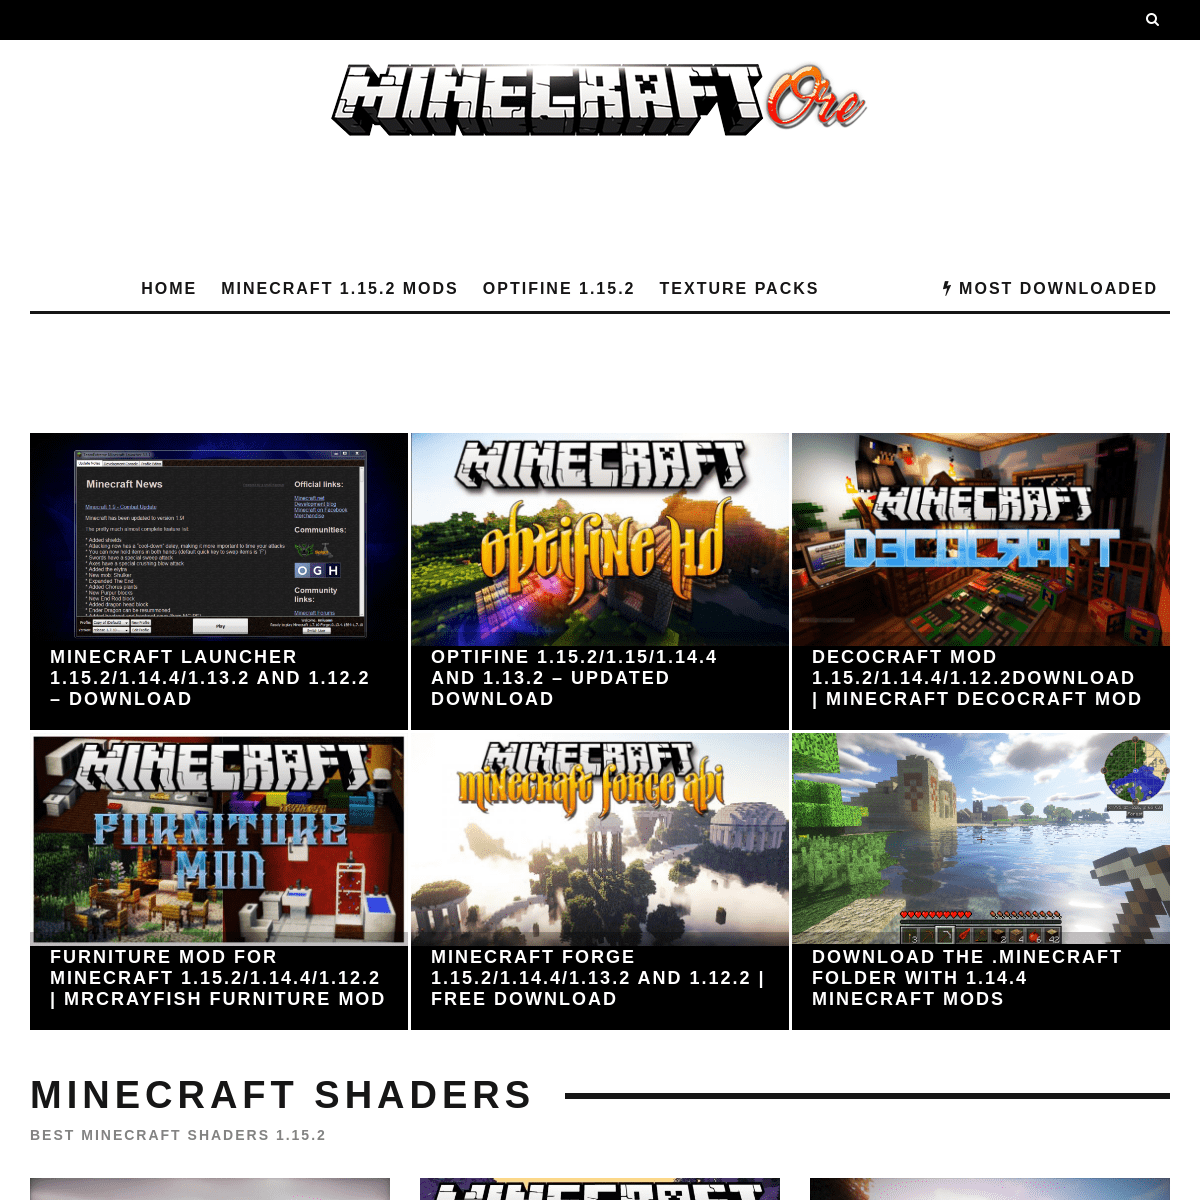 A complete backup of minecraftore.com